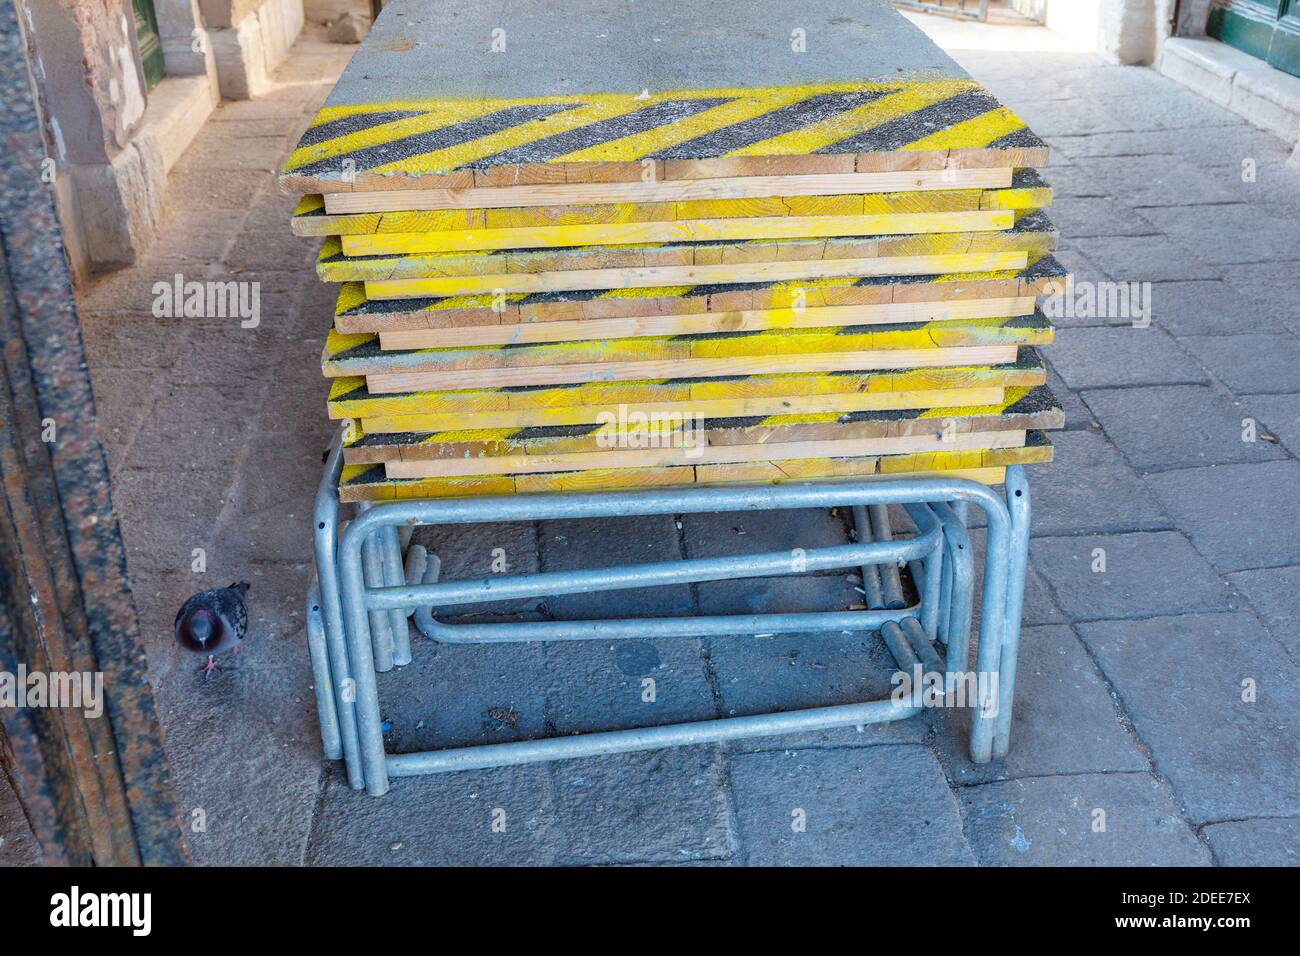 Raised Walkway Platforms Ready for Floods in Venice Stock Photo